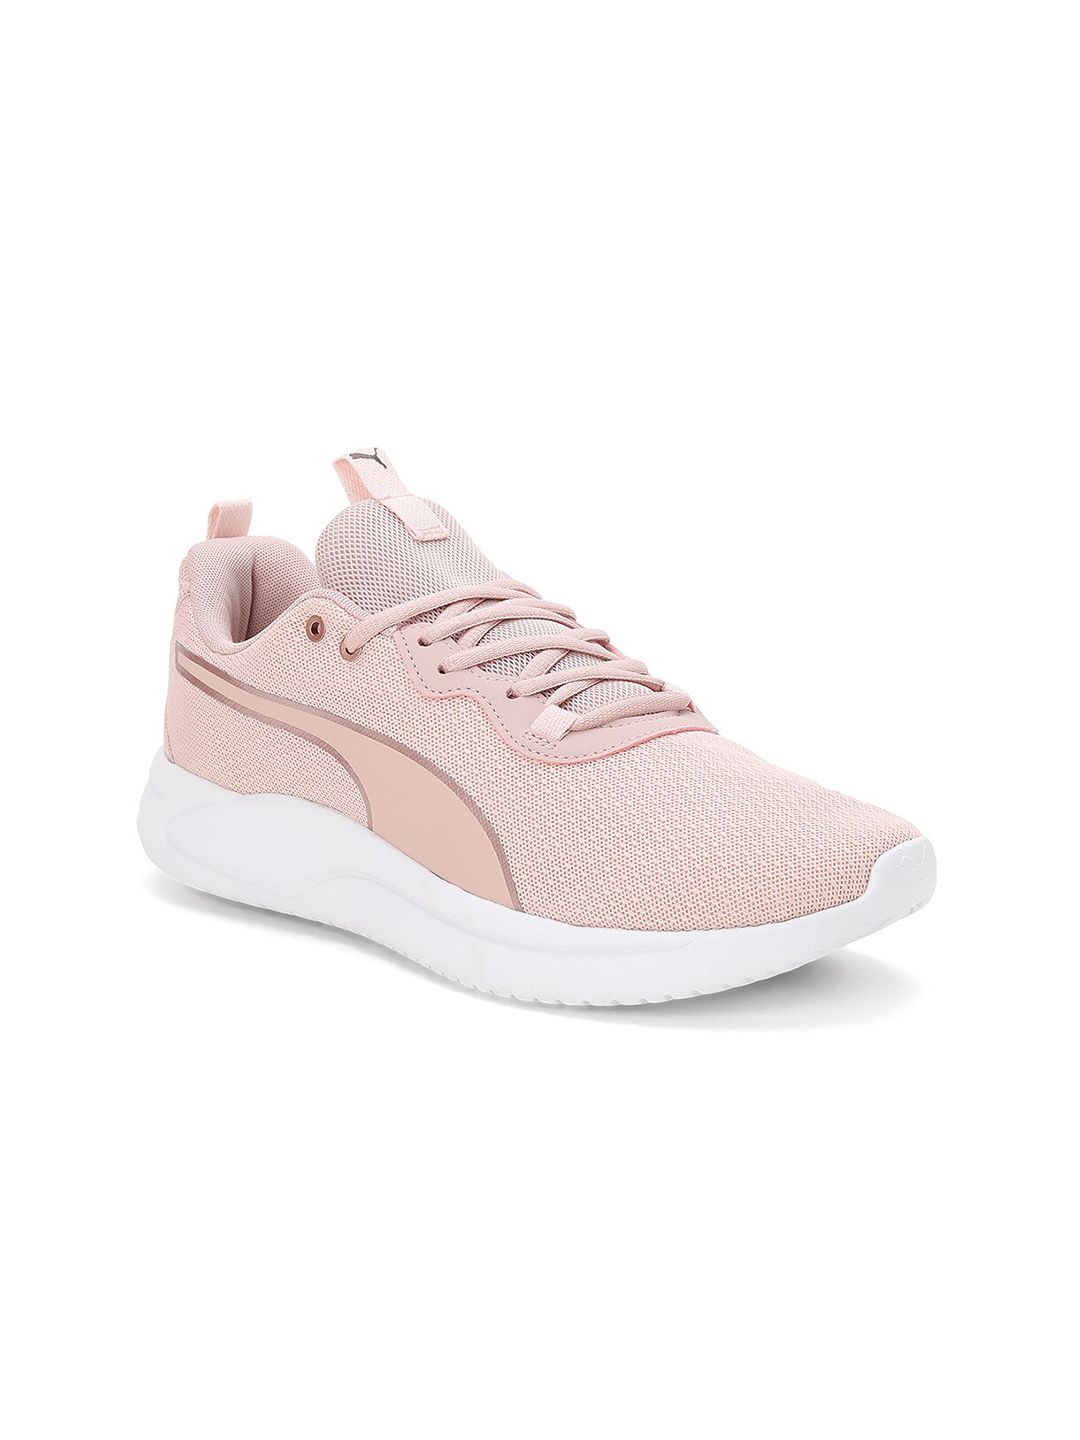 Puma Unisex Pink Textile Running Shoes Price in India